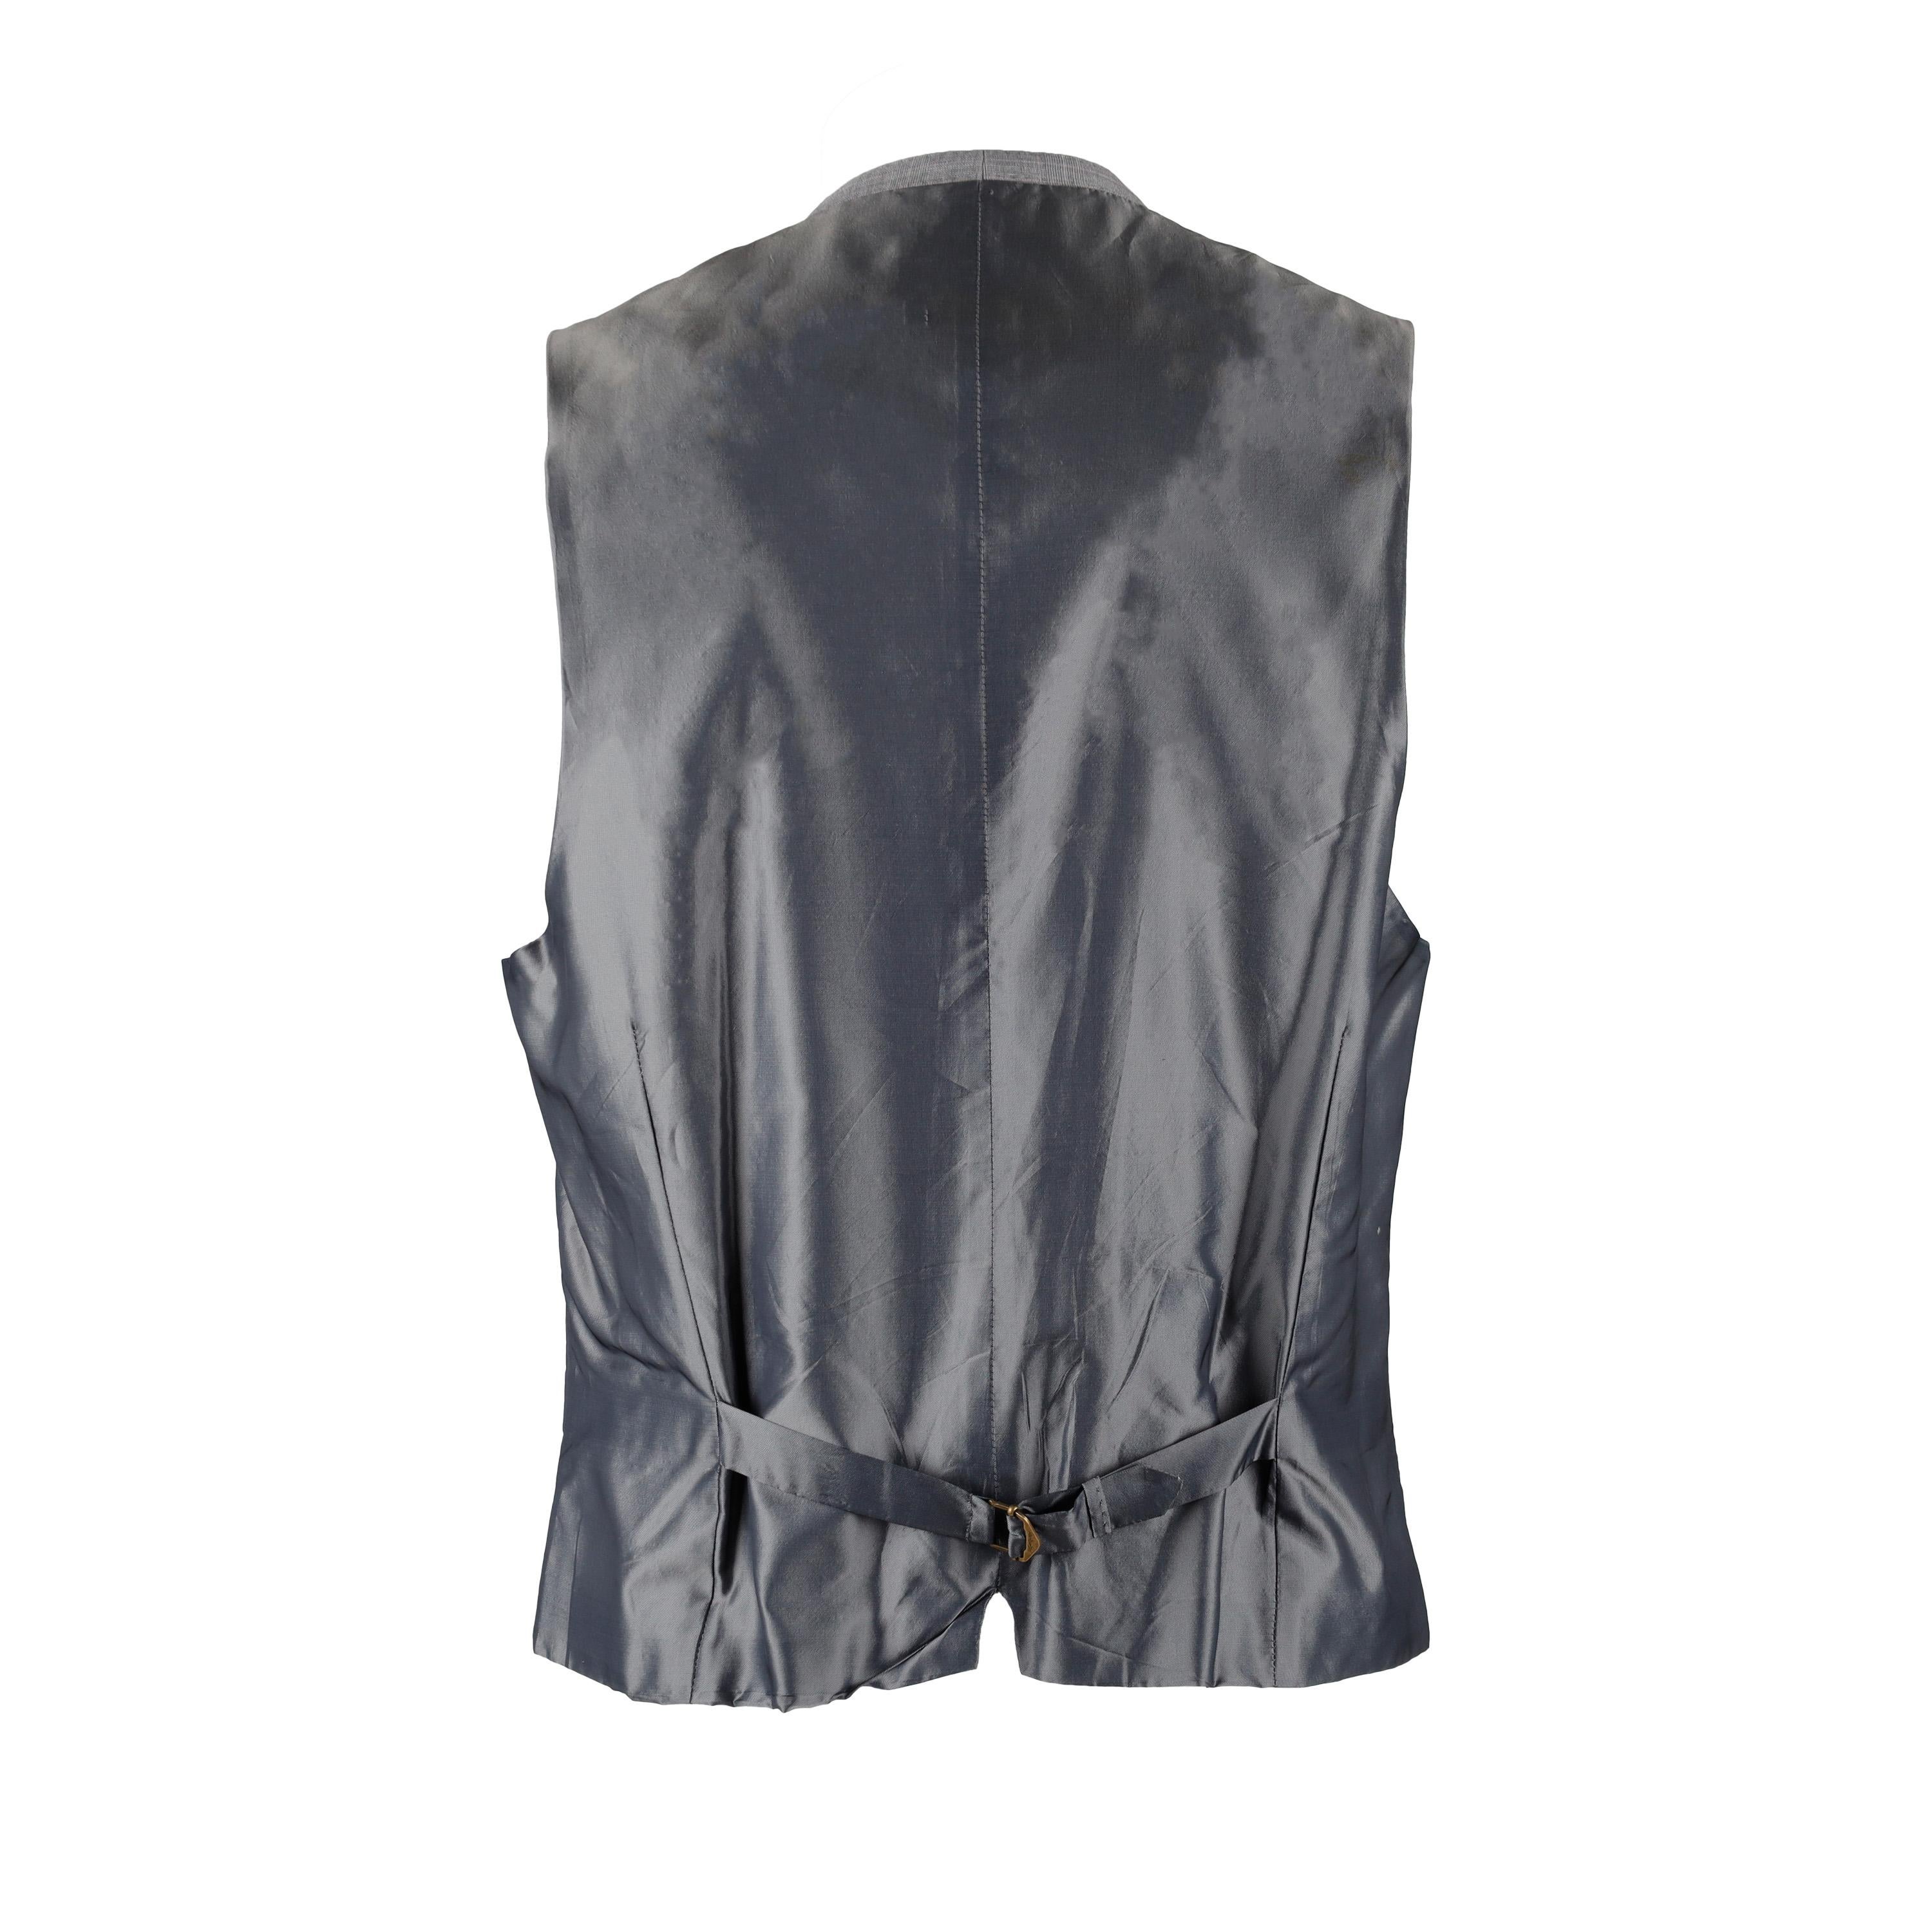 This vintage vest from Yves Saint Laurent Rive Gauche is crafted from lightweight wool. Featuring a timeless Prince of Wales pattern, the vest shows a contrast in the grey back and a pinstripe lining in cupro fabric. A classic piece for all